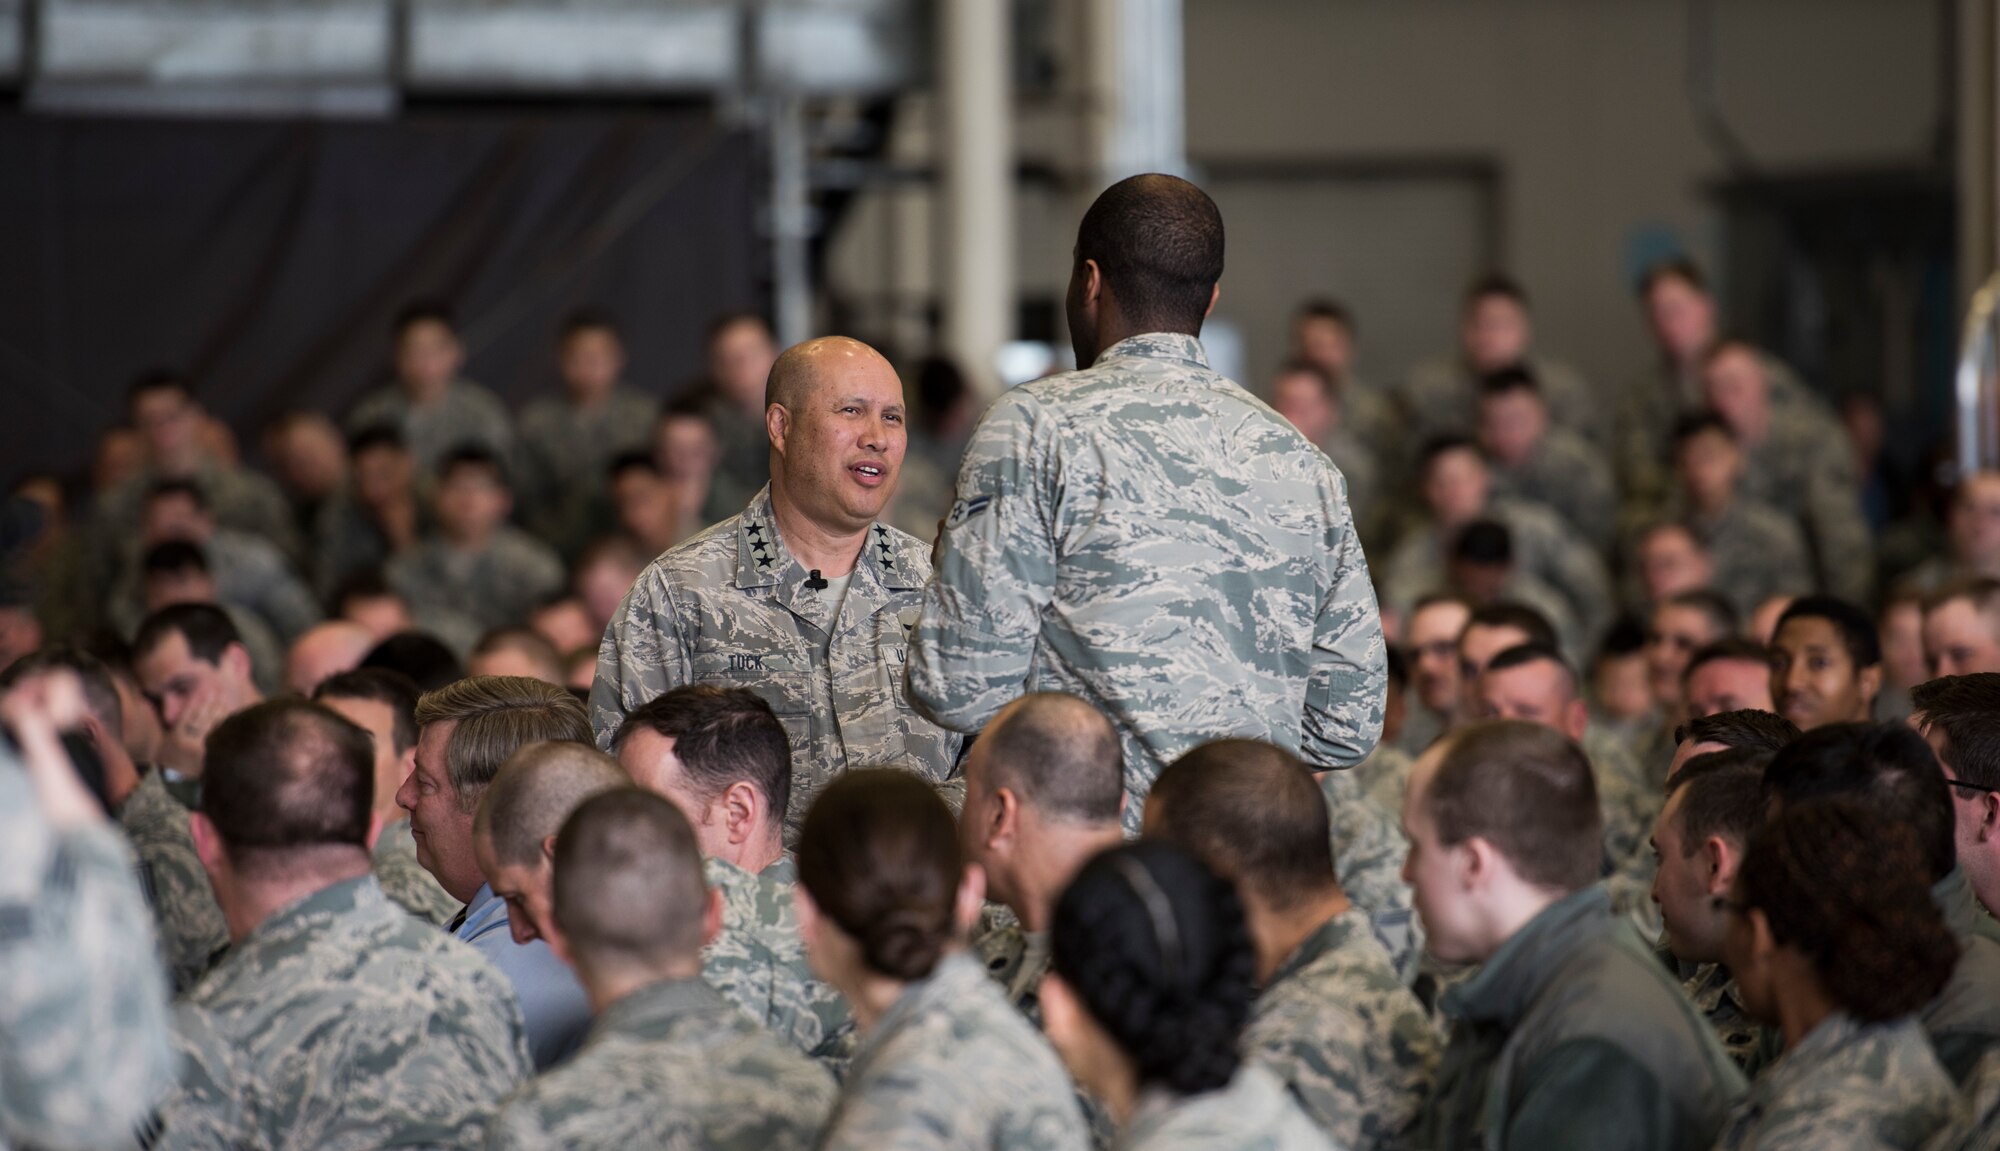 Lt. Gen. GI Tuck, 18th Air Force commander, answers questions during a base all call March 21, 2018, at Fairchild Air Force Base, Washington. Tuck spoke about the importance of working with joint forces and multi-domain command and control. (U.S. Air Force photo/Senior Airman Sean Campbell)